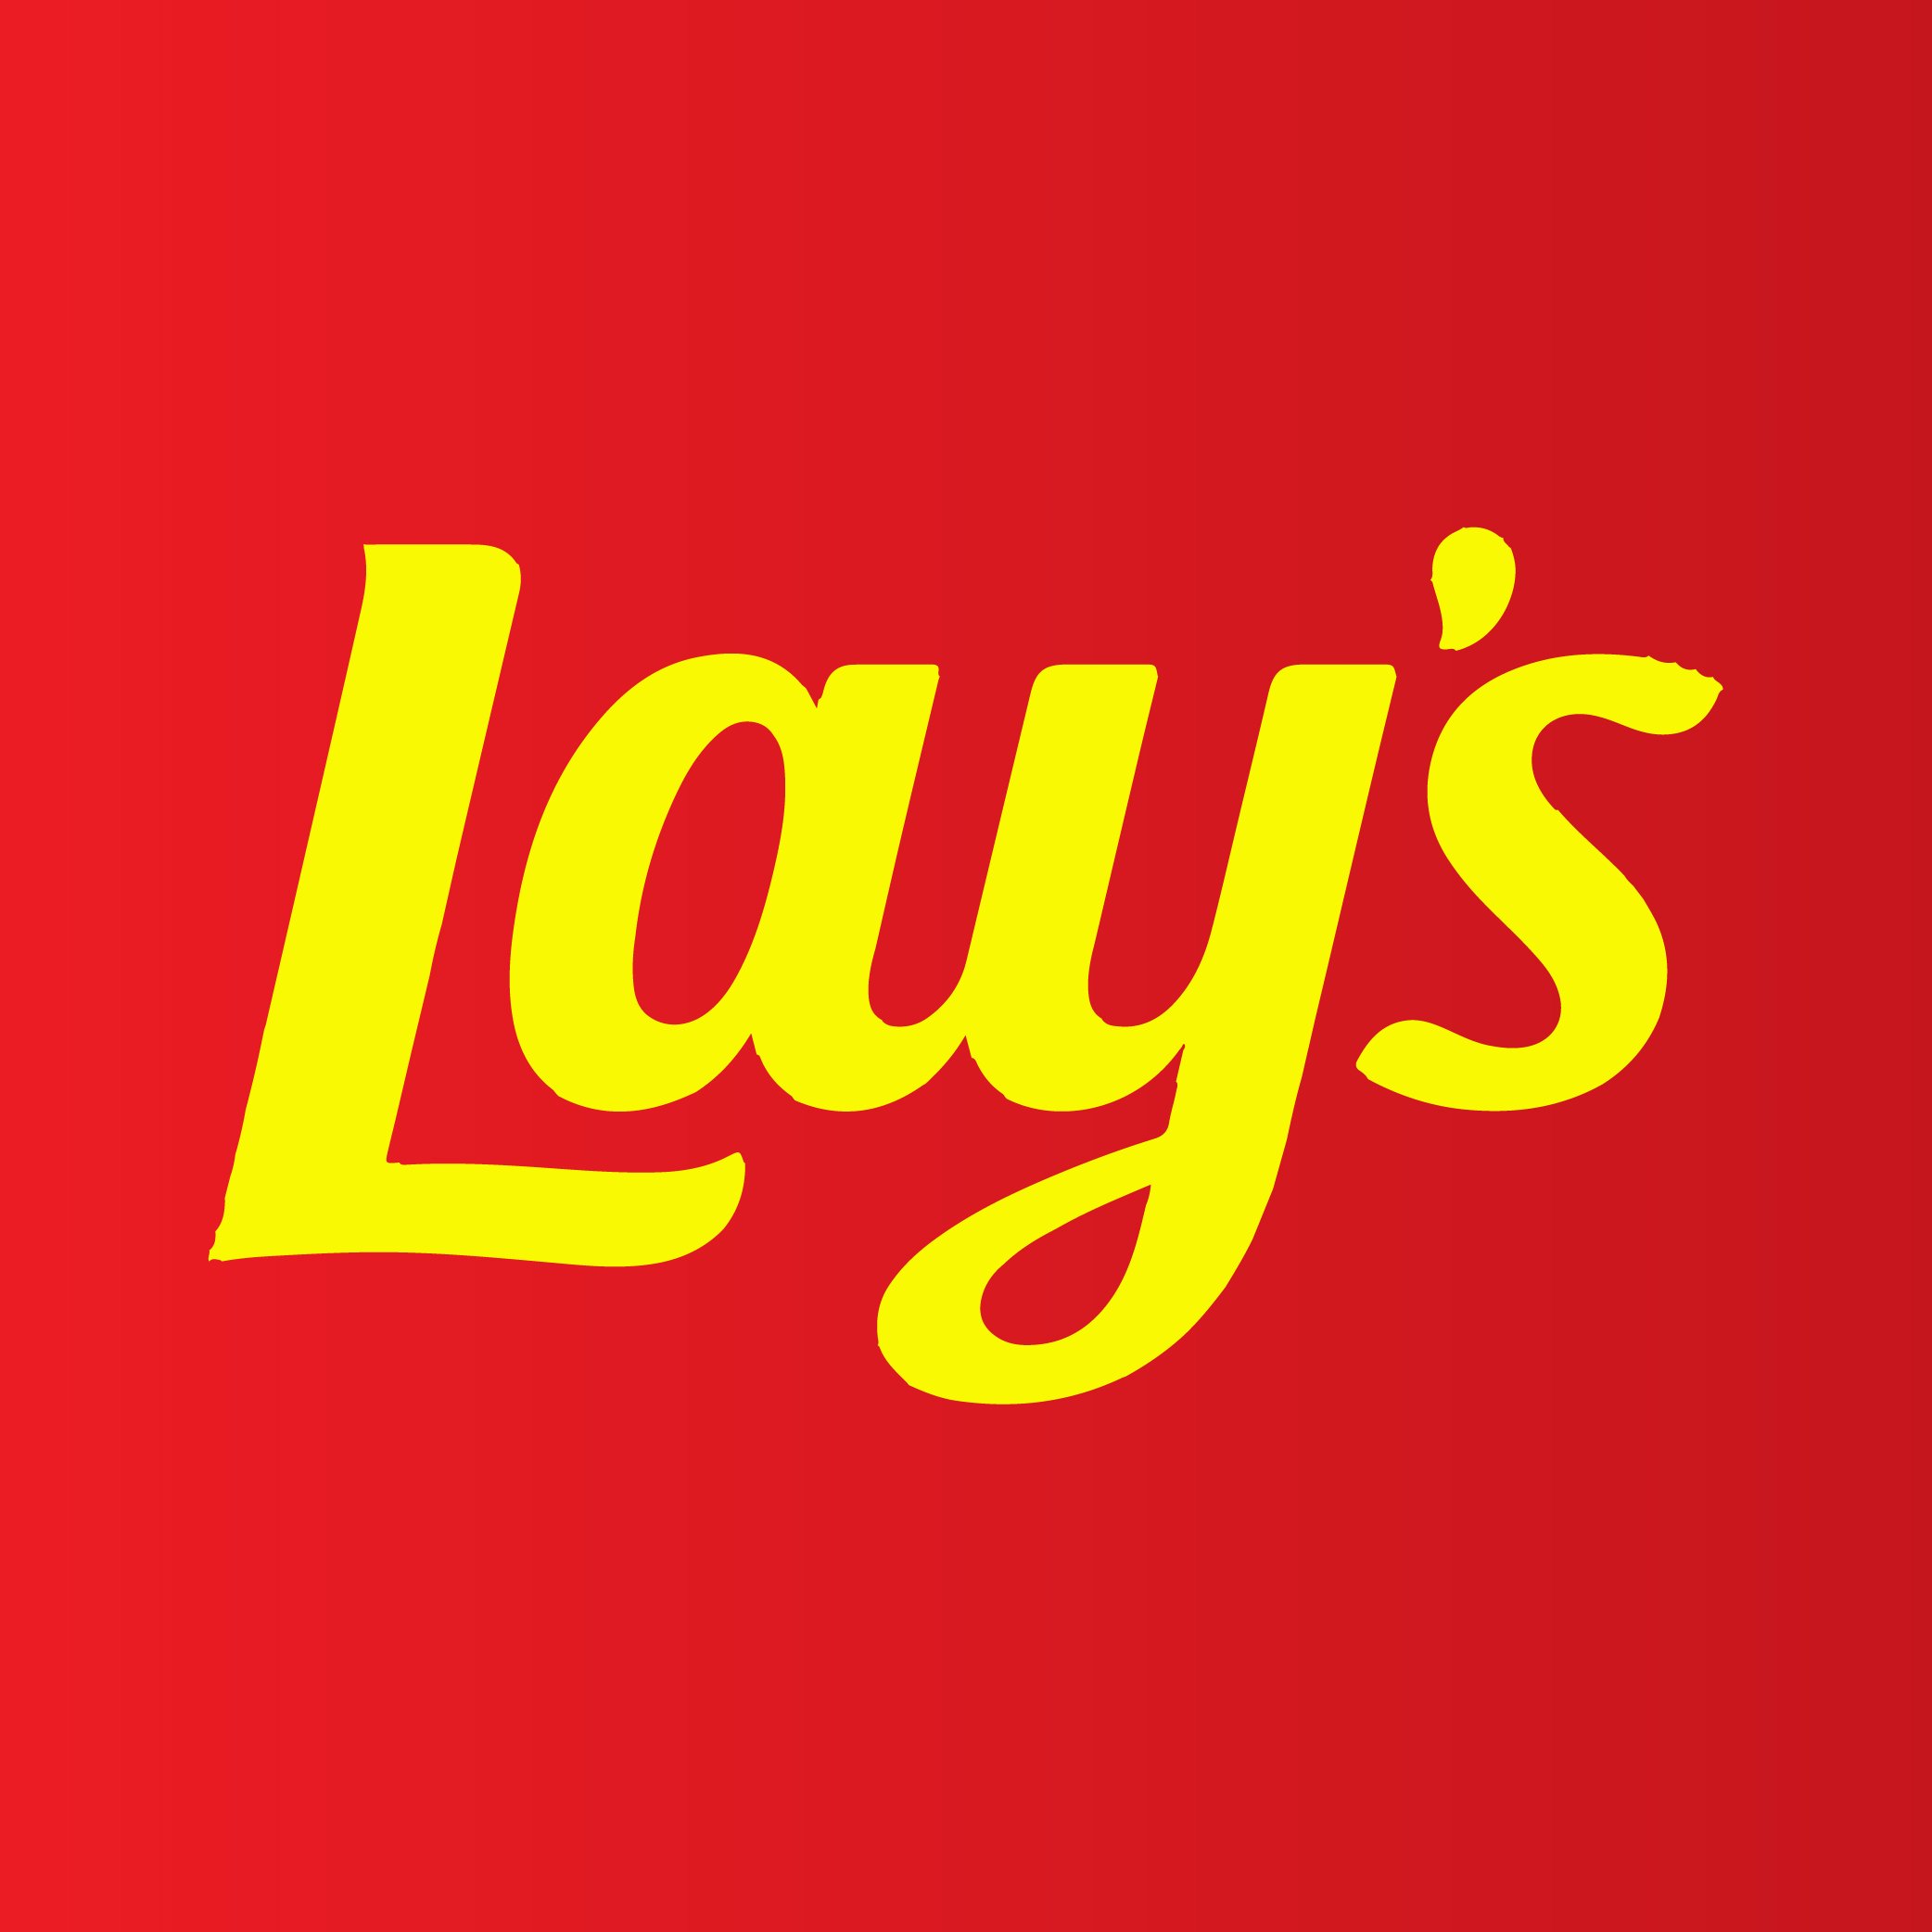 Lays chips logo editorial stock image. Image of chips - 95725199